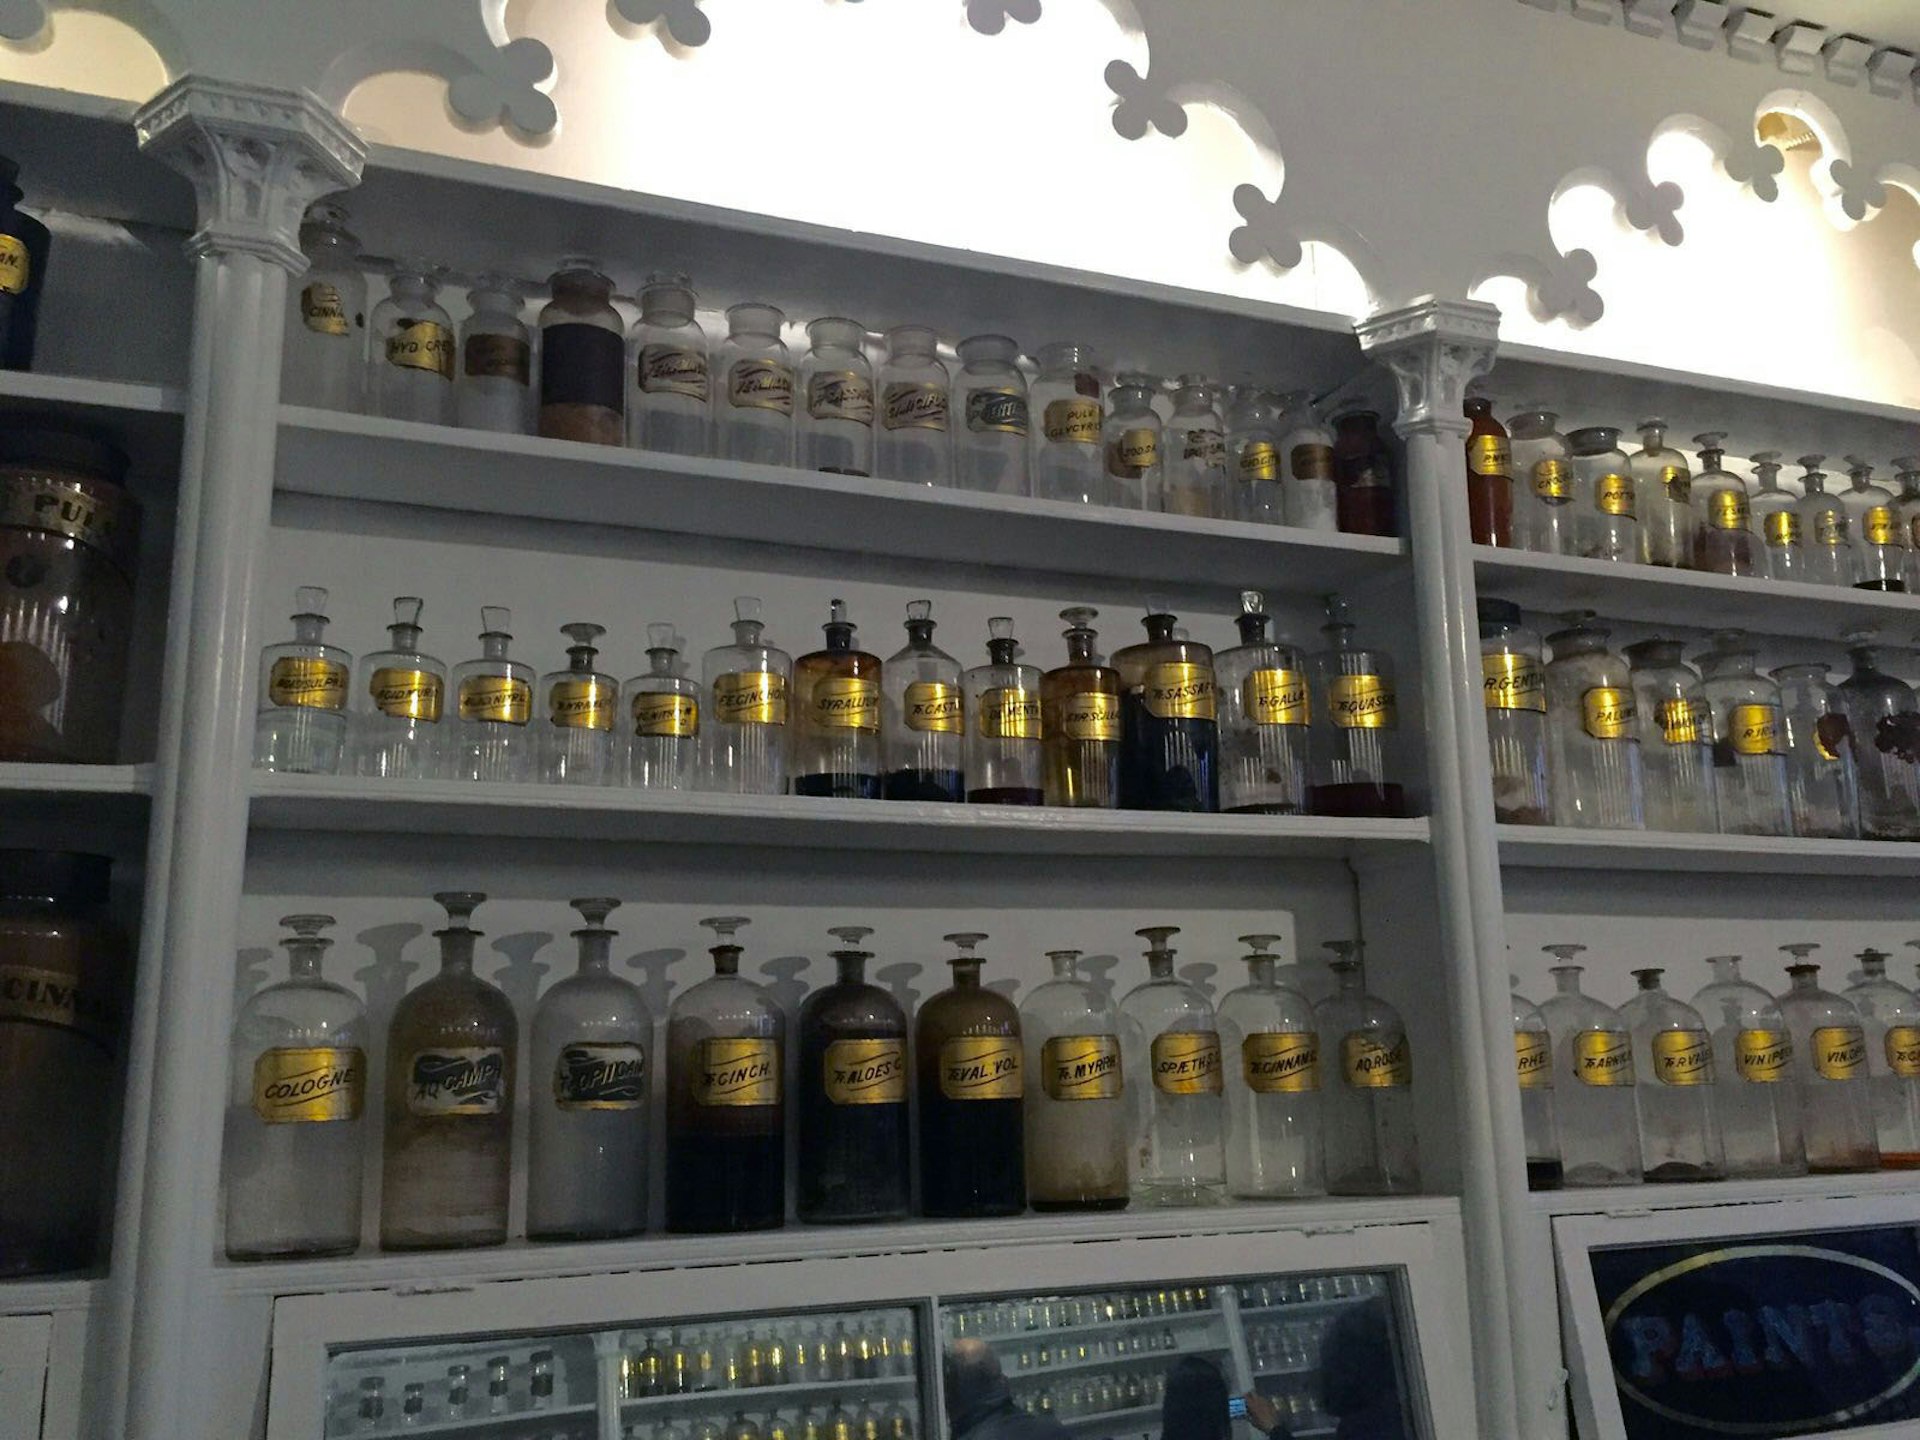 Antique medicine bottles lined up at the Stabler-Leadbeater Apothecary Museum © Barbara Noe Kennedy / Lonely Planet